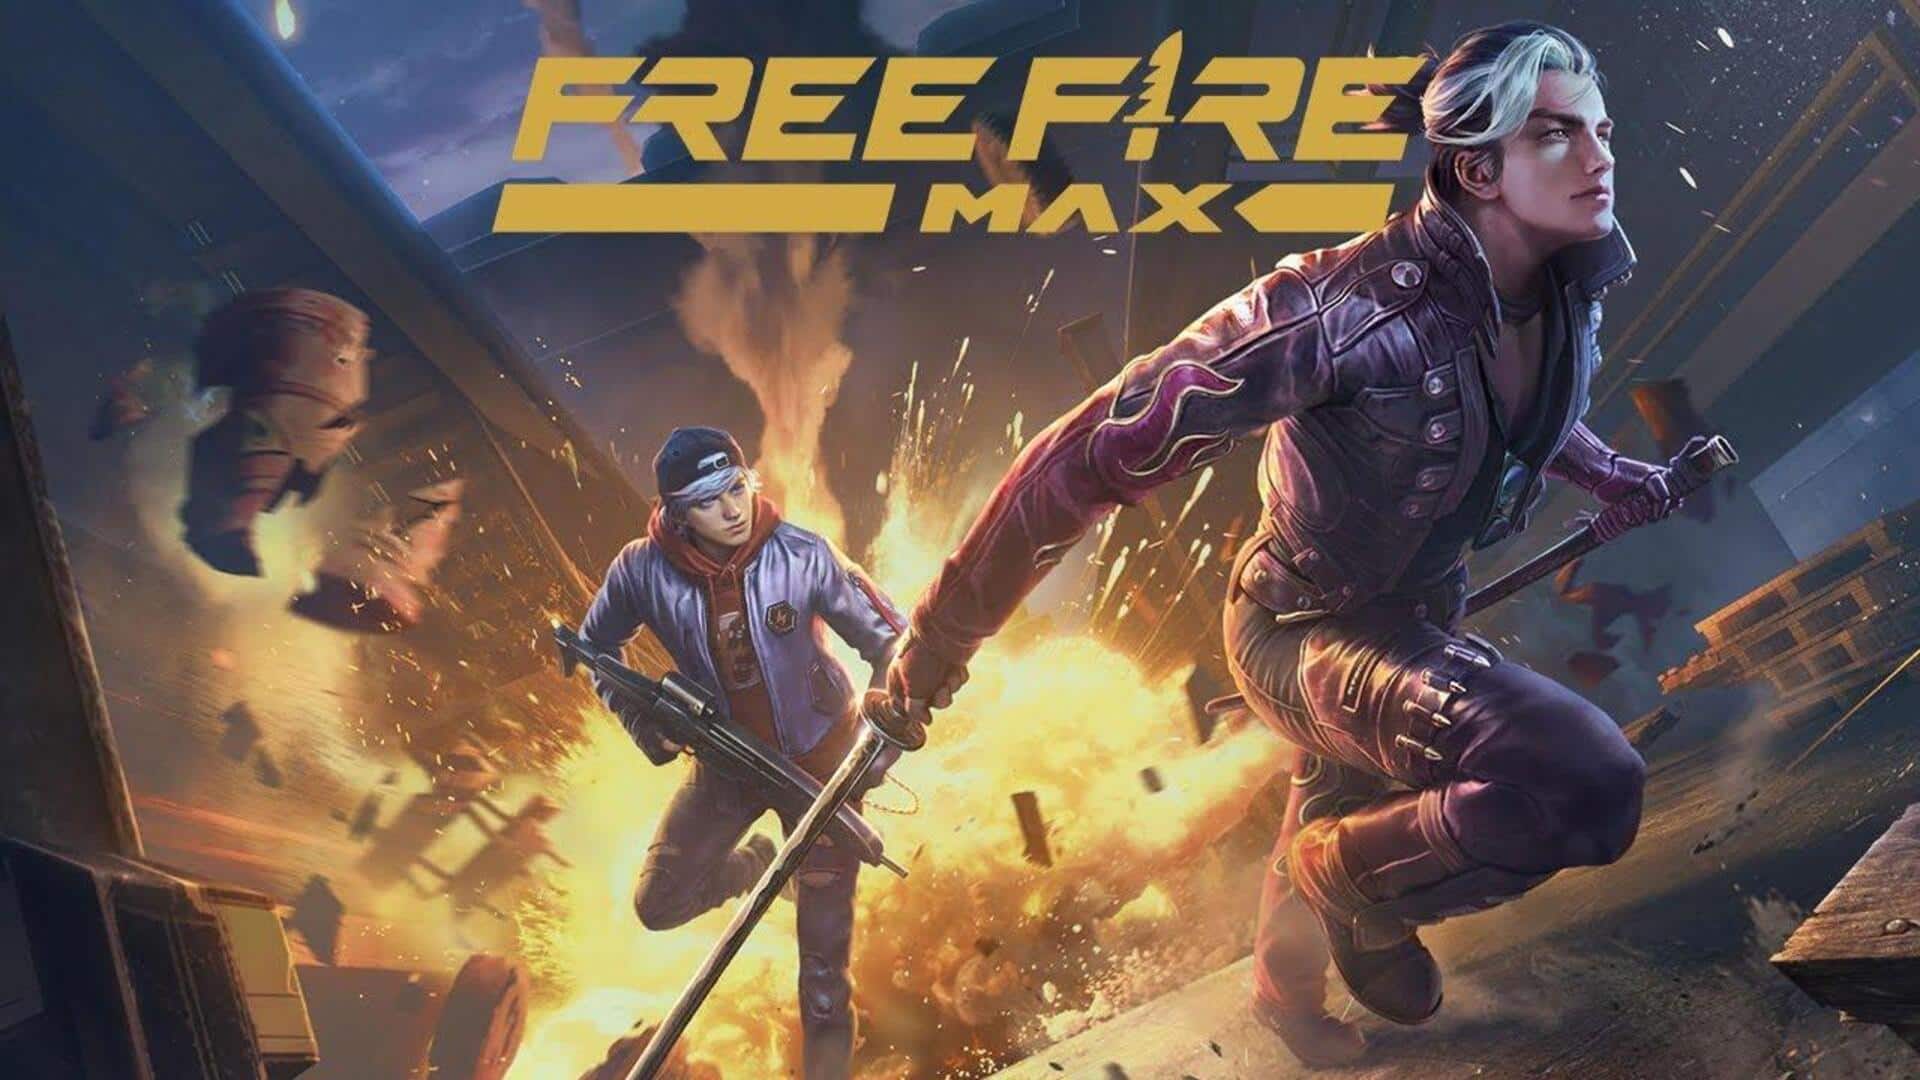 Garena Free Fire MAX releases redeem codes for April 28